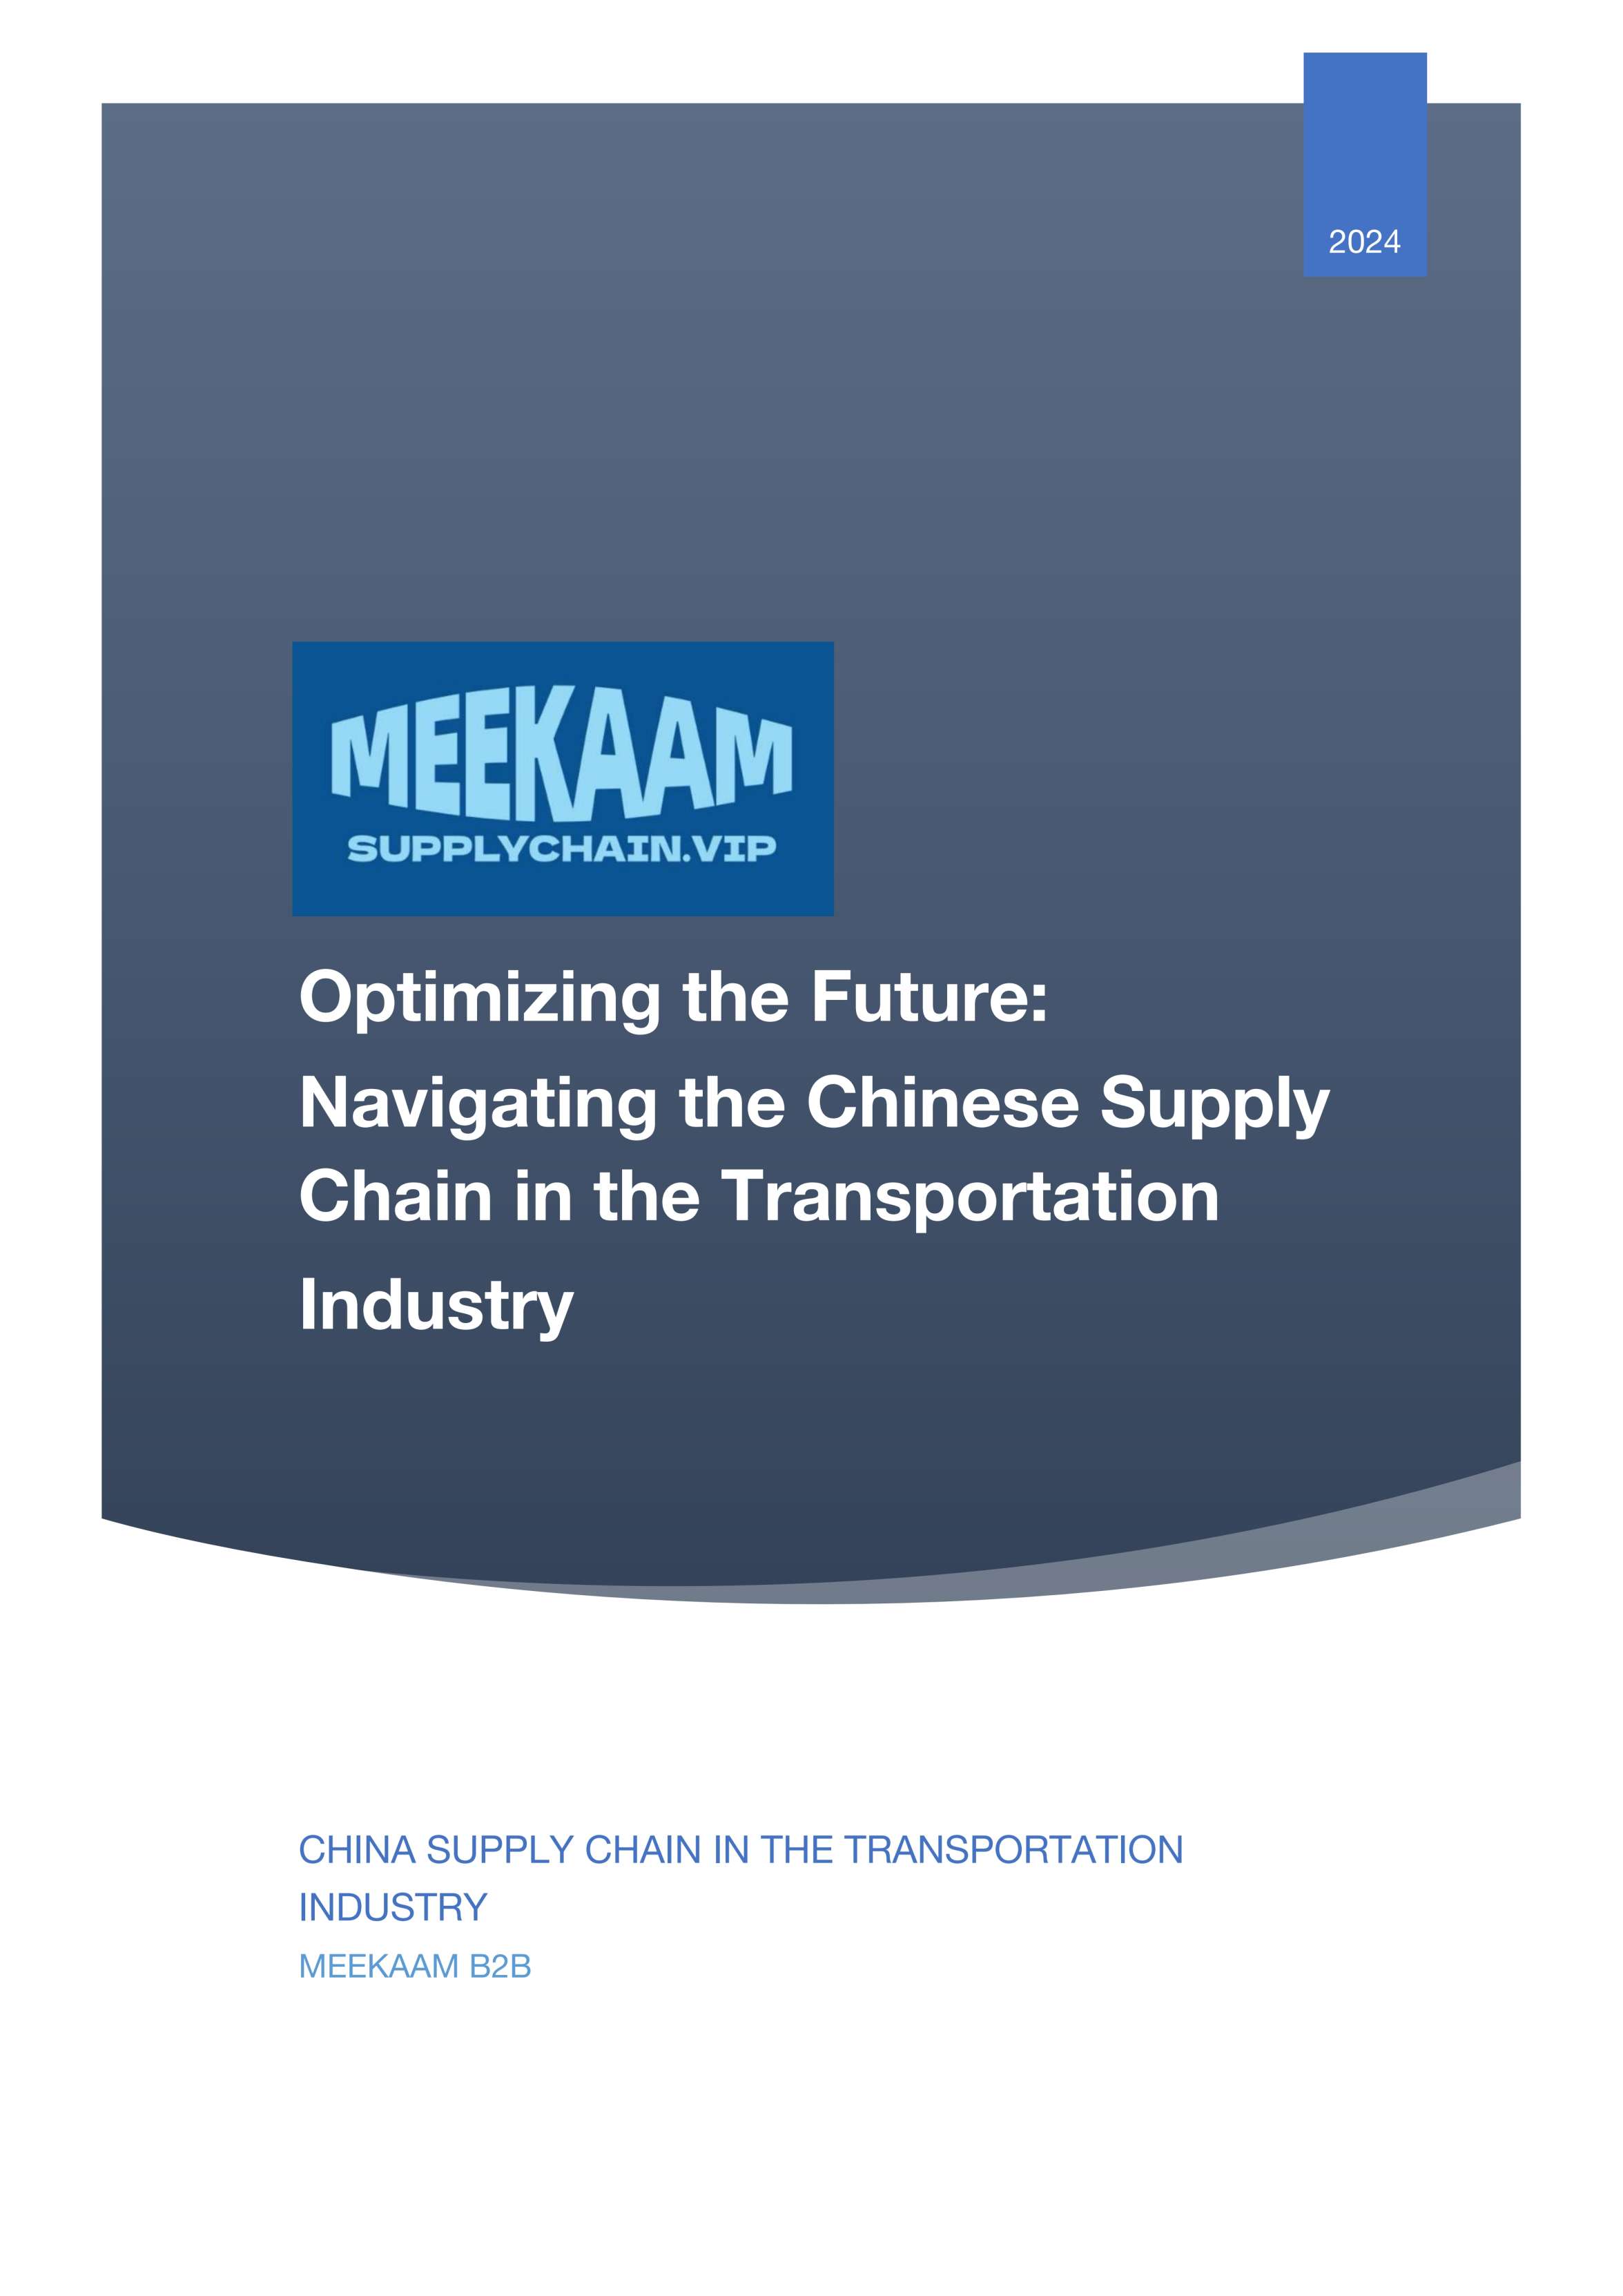 Optimizing the Future: Navigating the Chinese Supply Chain in the Transportation Industry